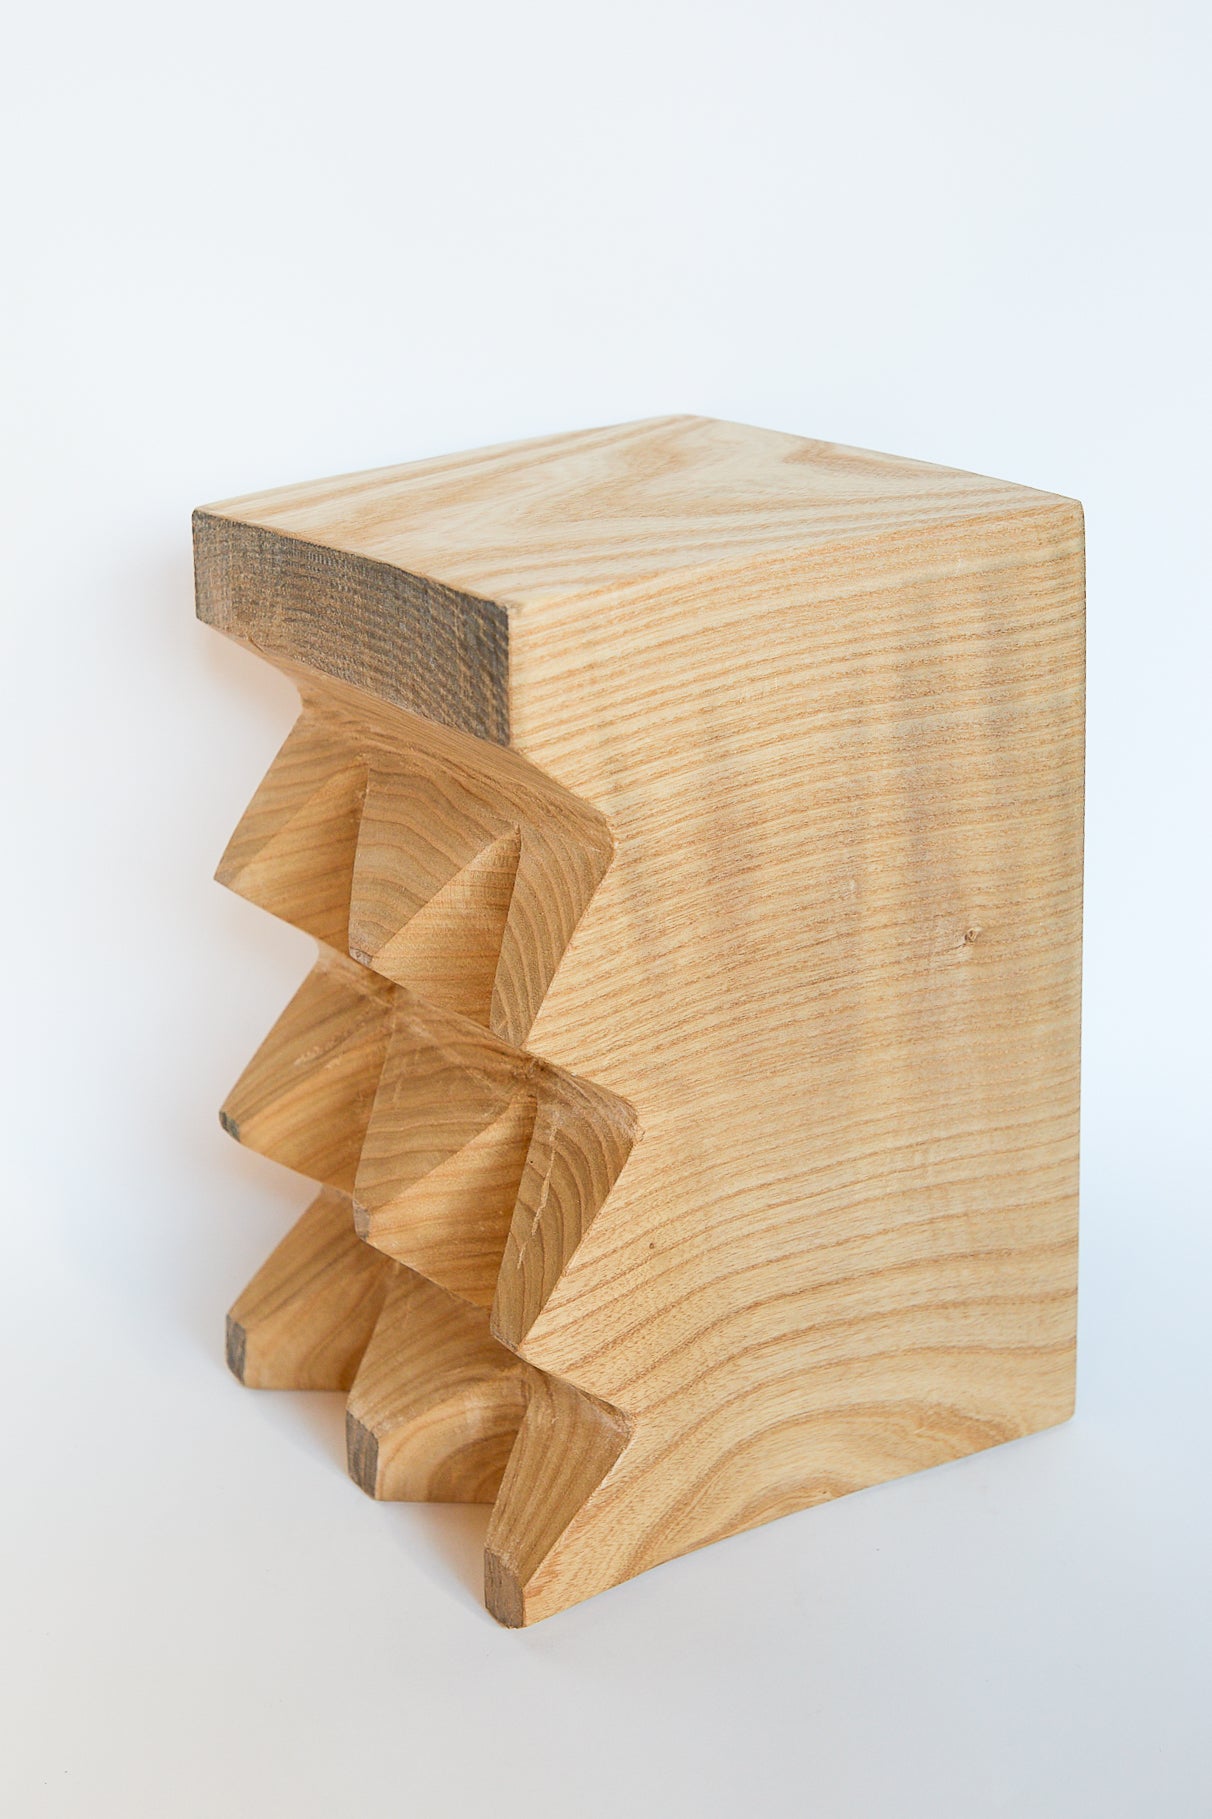 A Kingston Ash II side table, handcrafted with a slatted top by Cody Brgant.